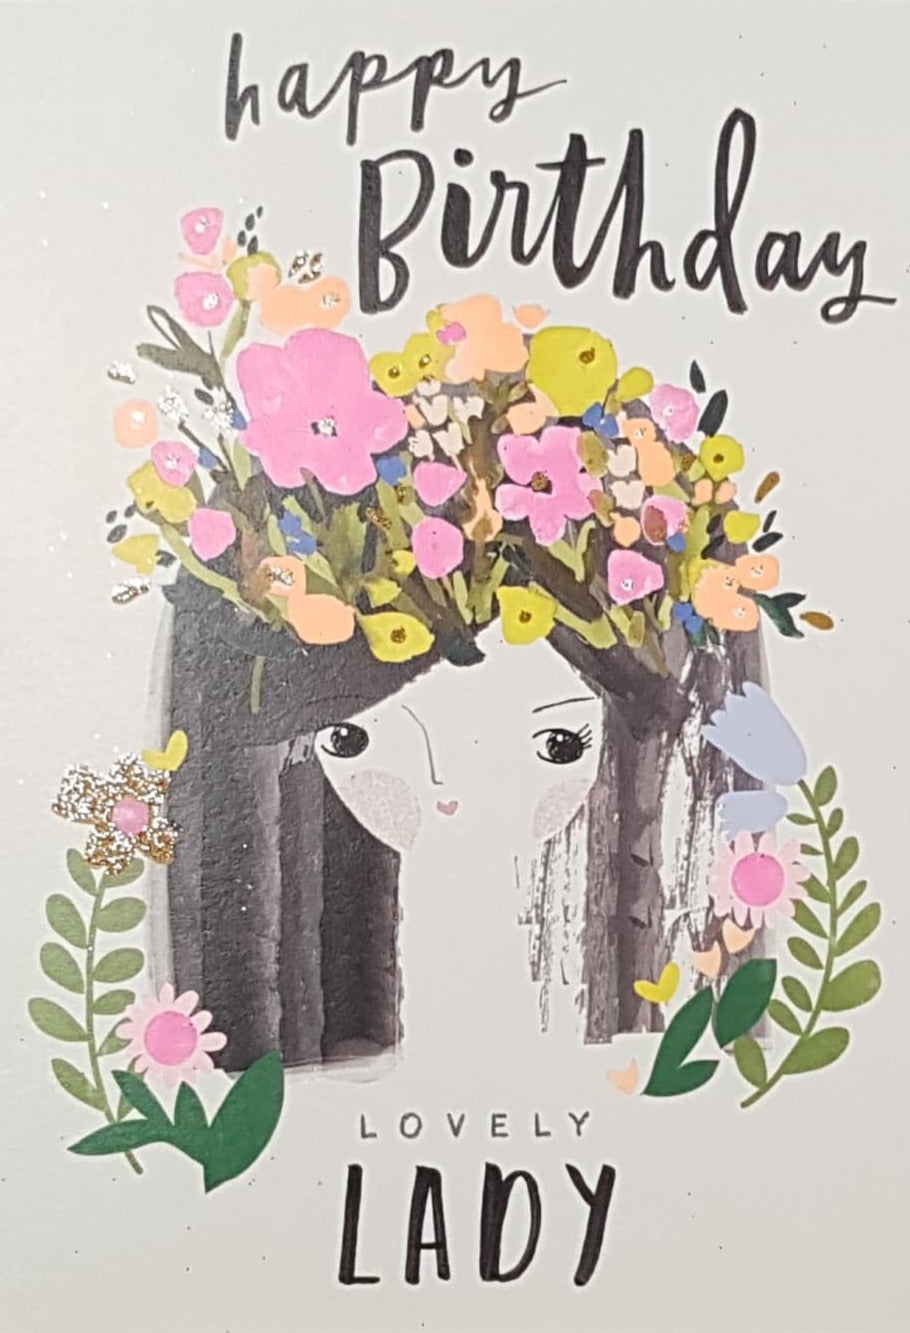 Birthday Card - Lovely Lady / A Woman With Hair Covered In Flowers